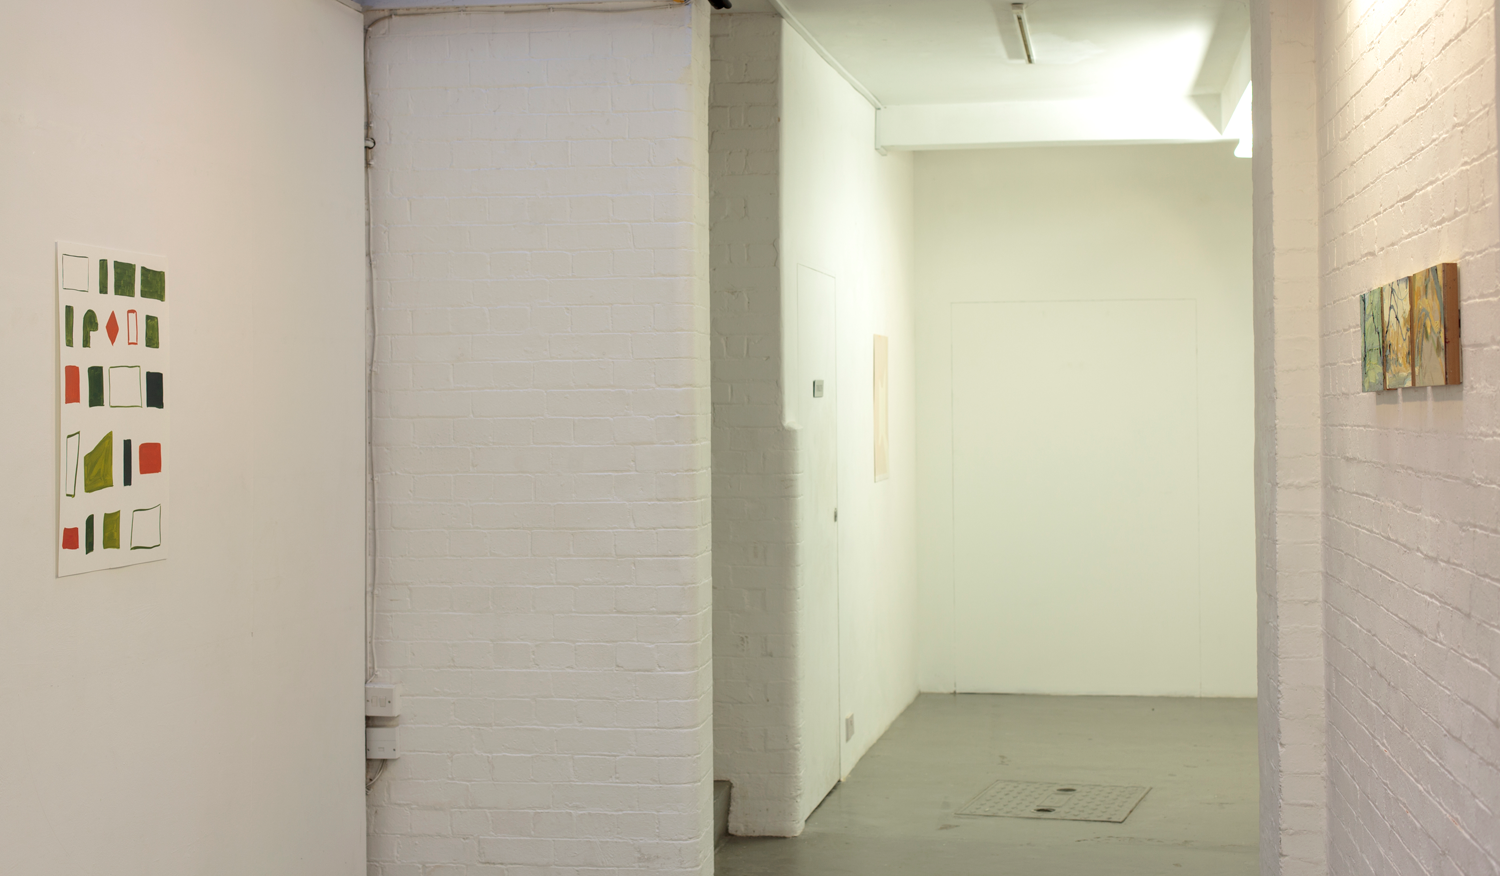  Lonely Long Feet - Sara Kerry Jessica Wilson  Curated by Peter Ashton Jones  Standpoint Gallery, London  2015&nbsp; 